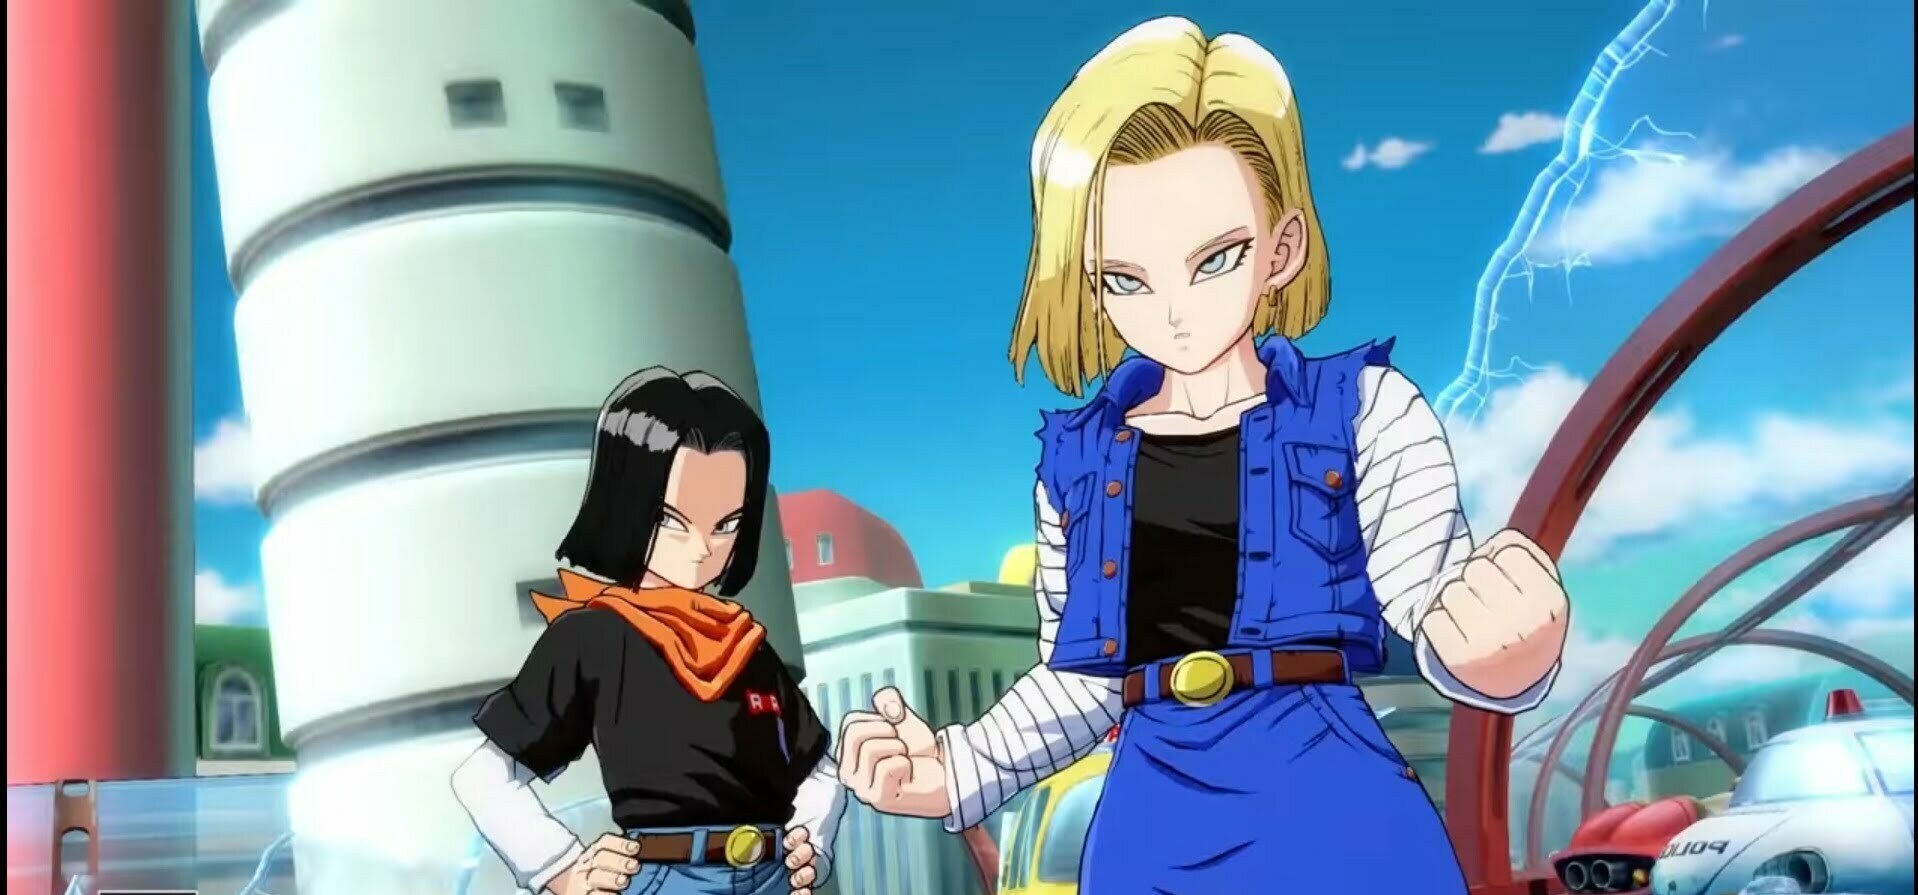 Android 18 in B Tier 